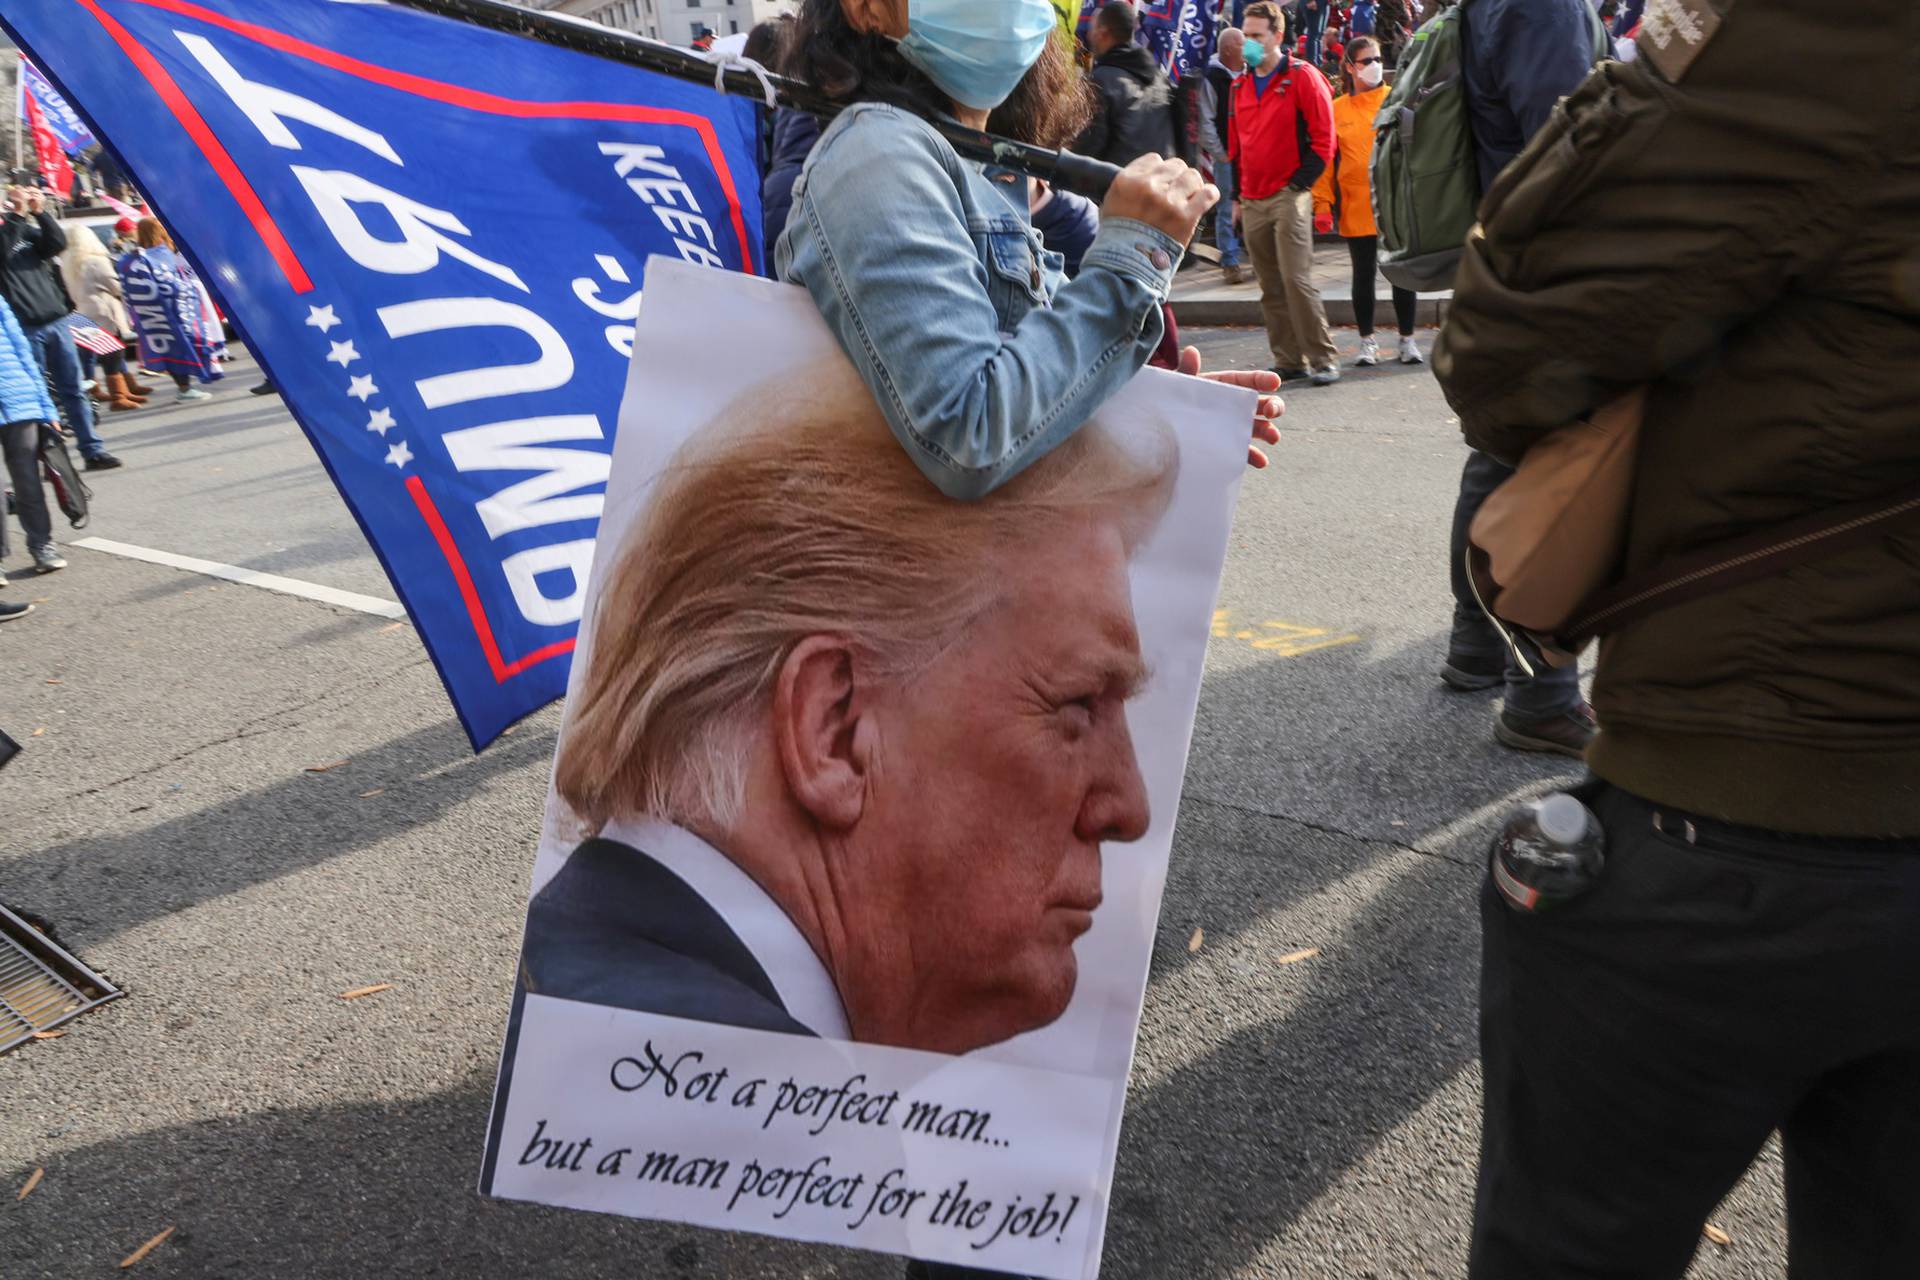 People take part in a rally to protest the results of the election, in Washington